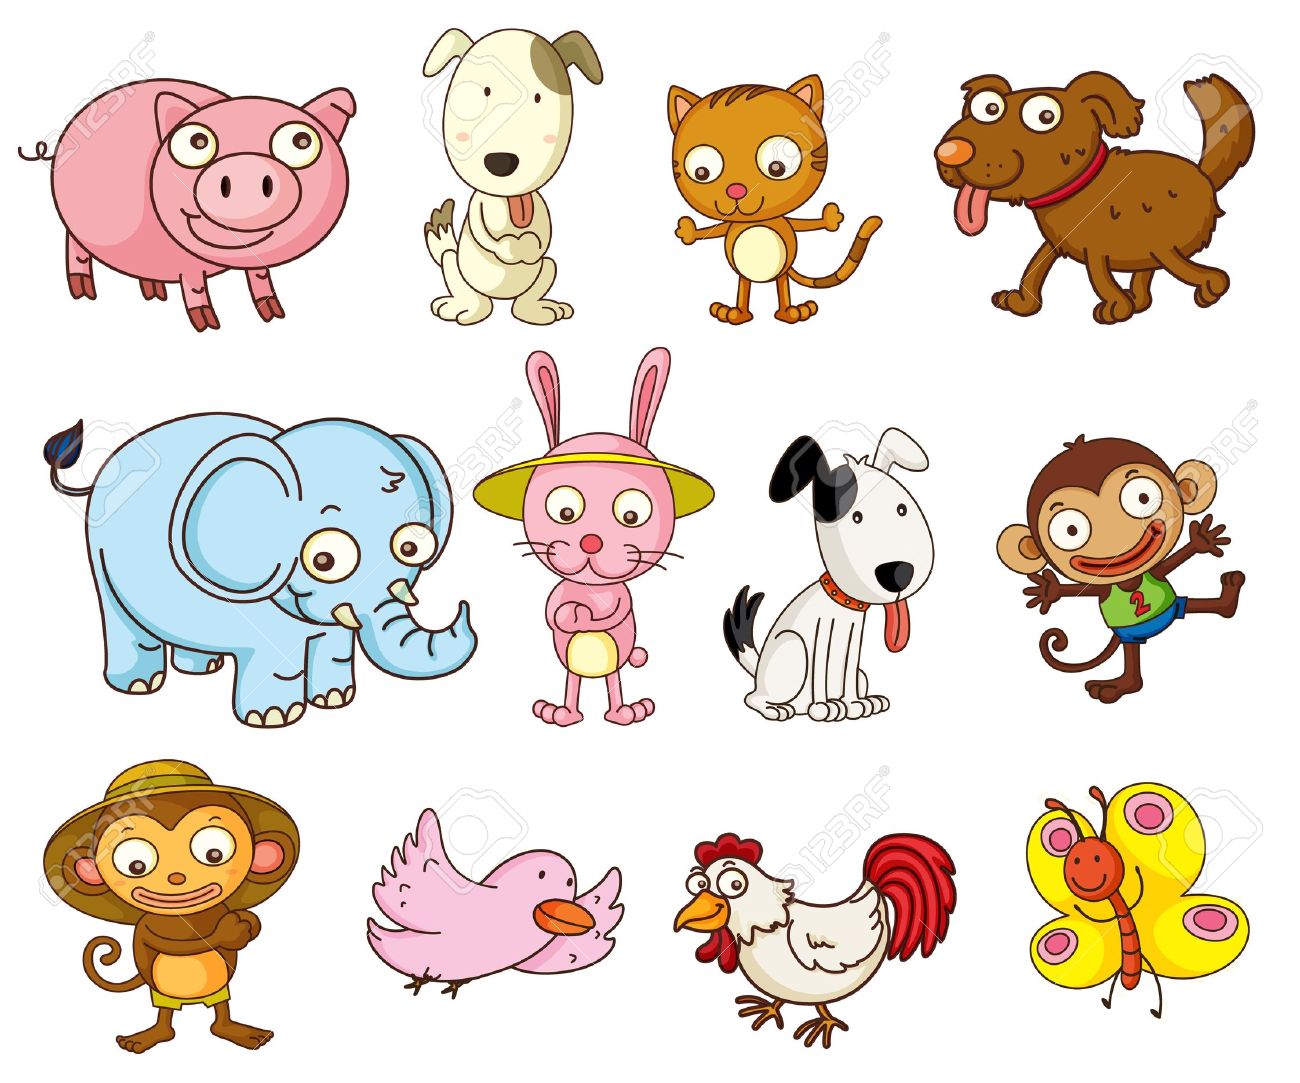 clip art of animals free download - photo #50